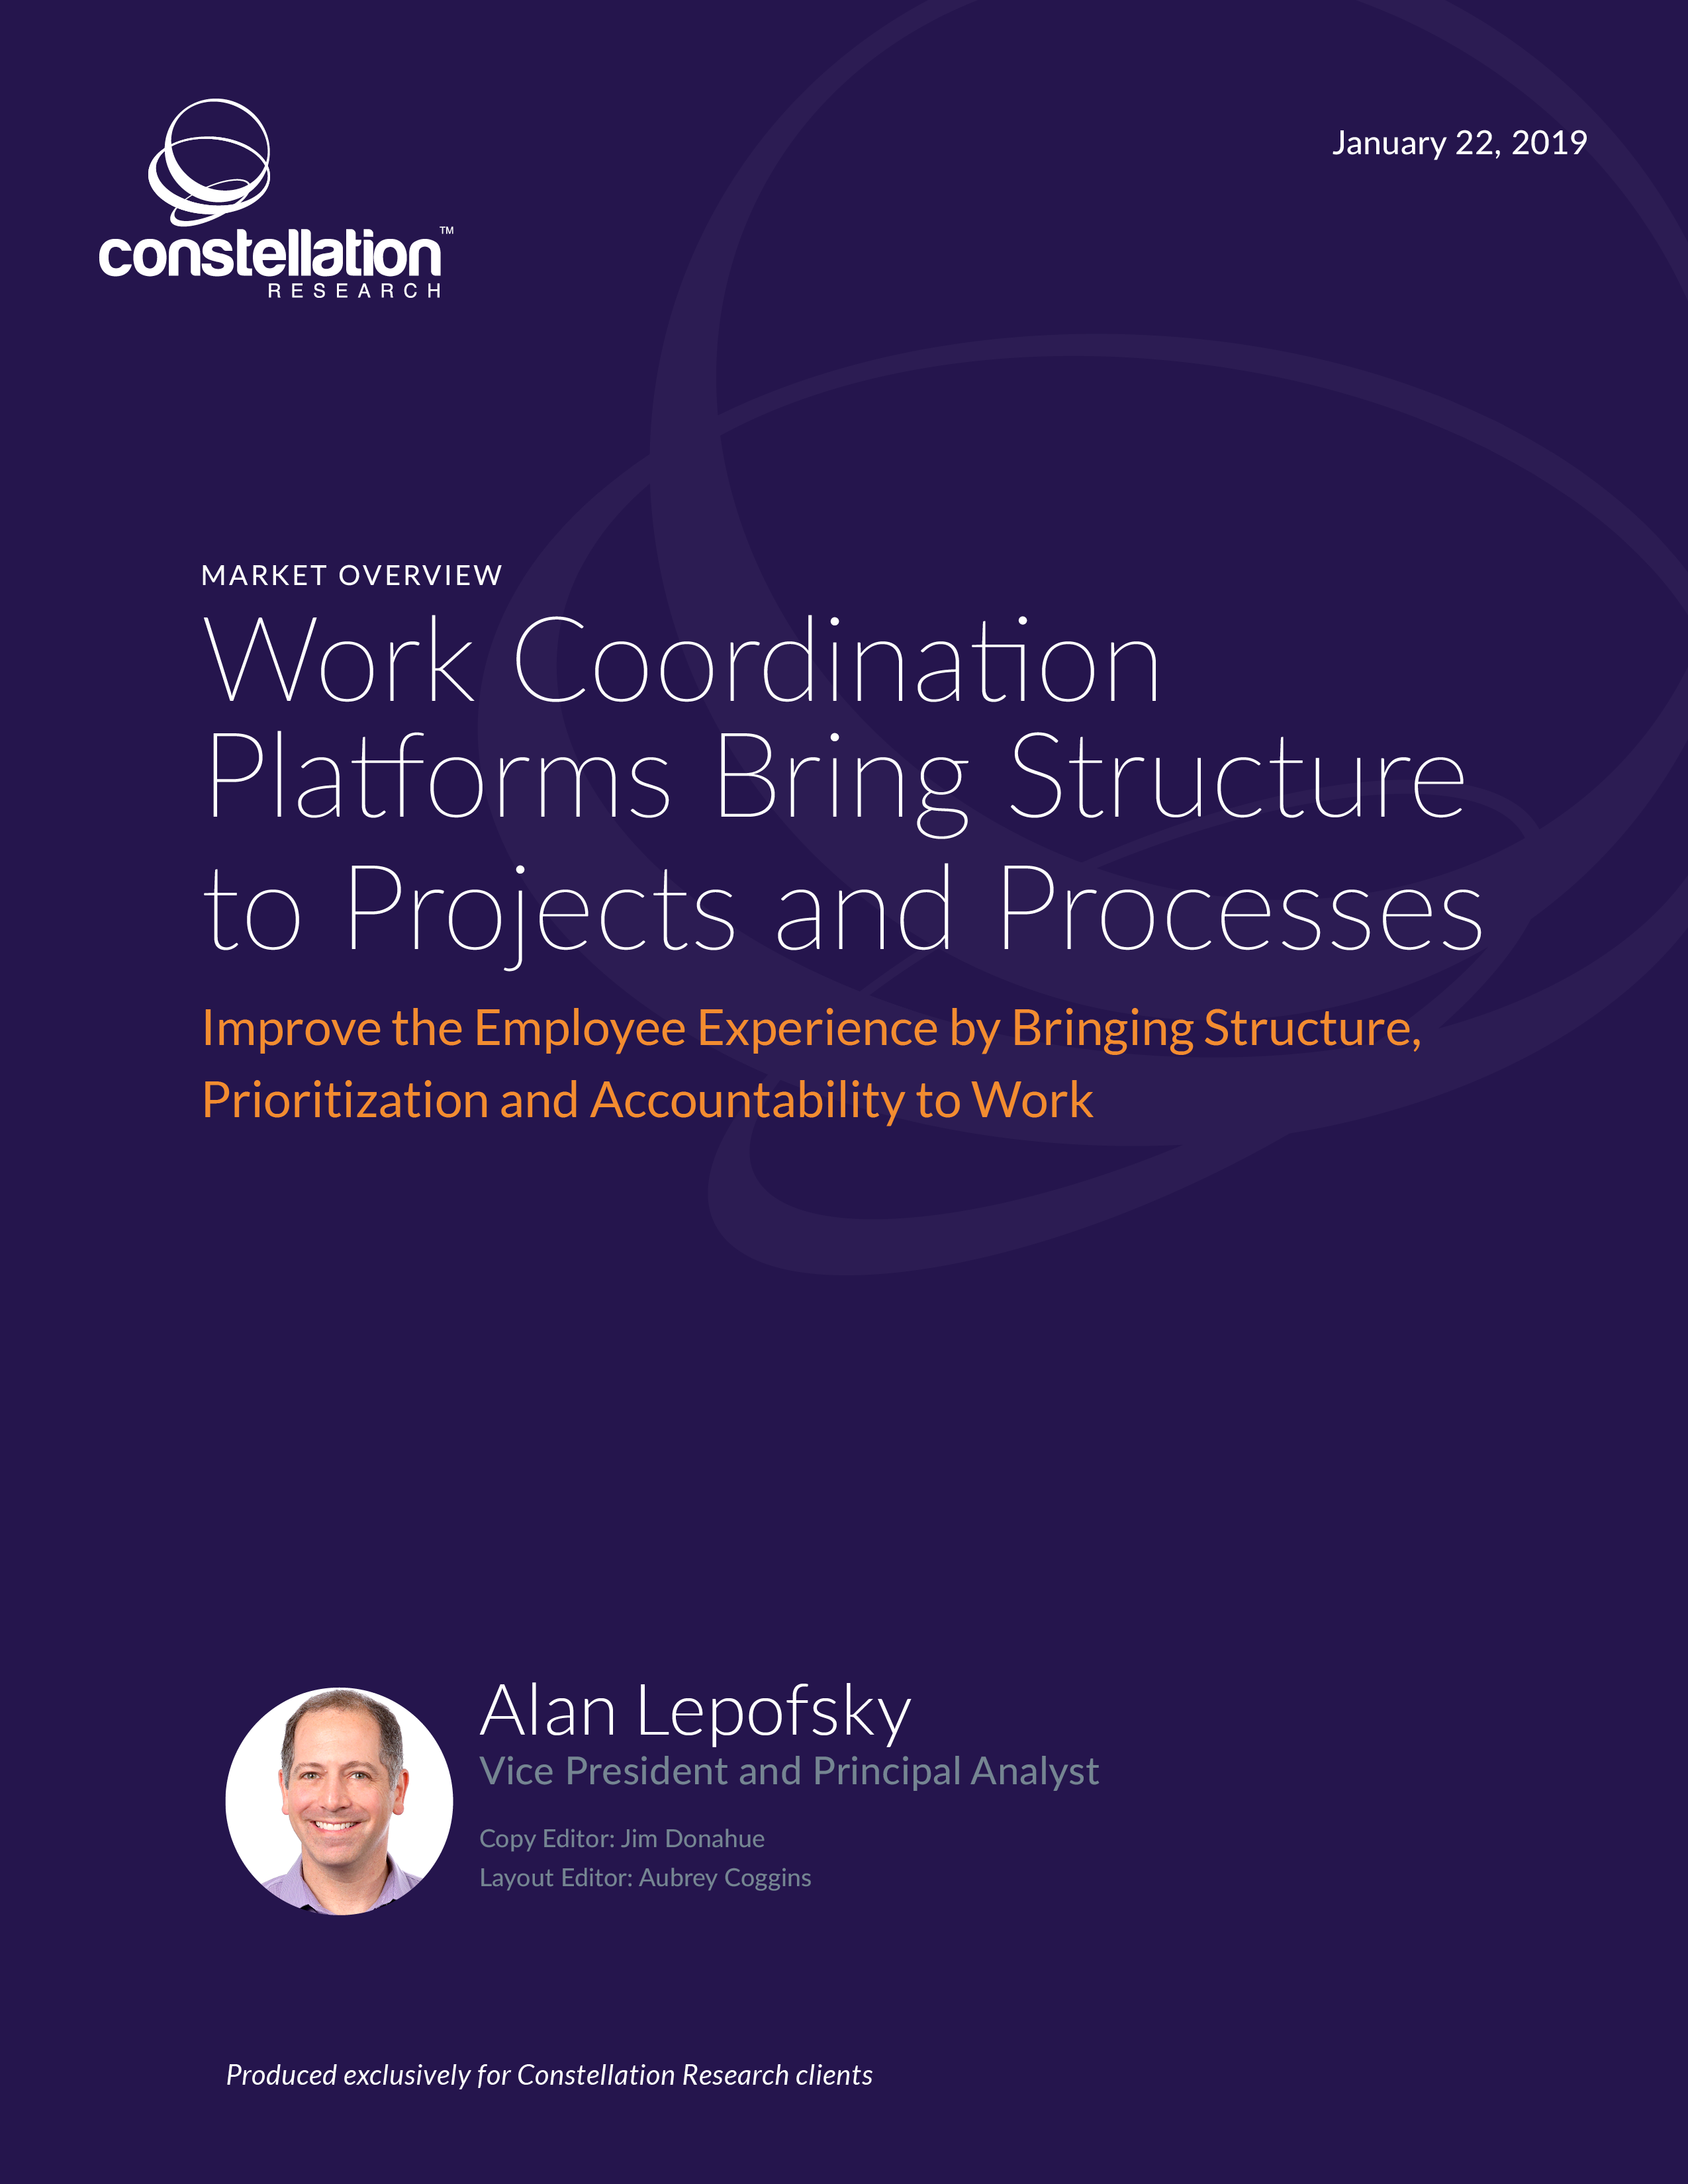 Work Coordination Platforms Bring Structure to Projects and Processes